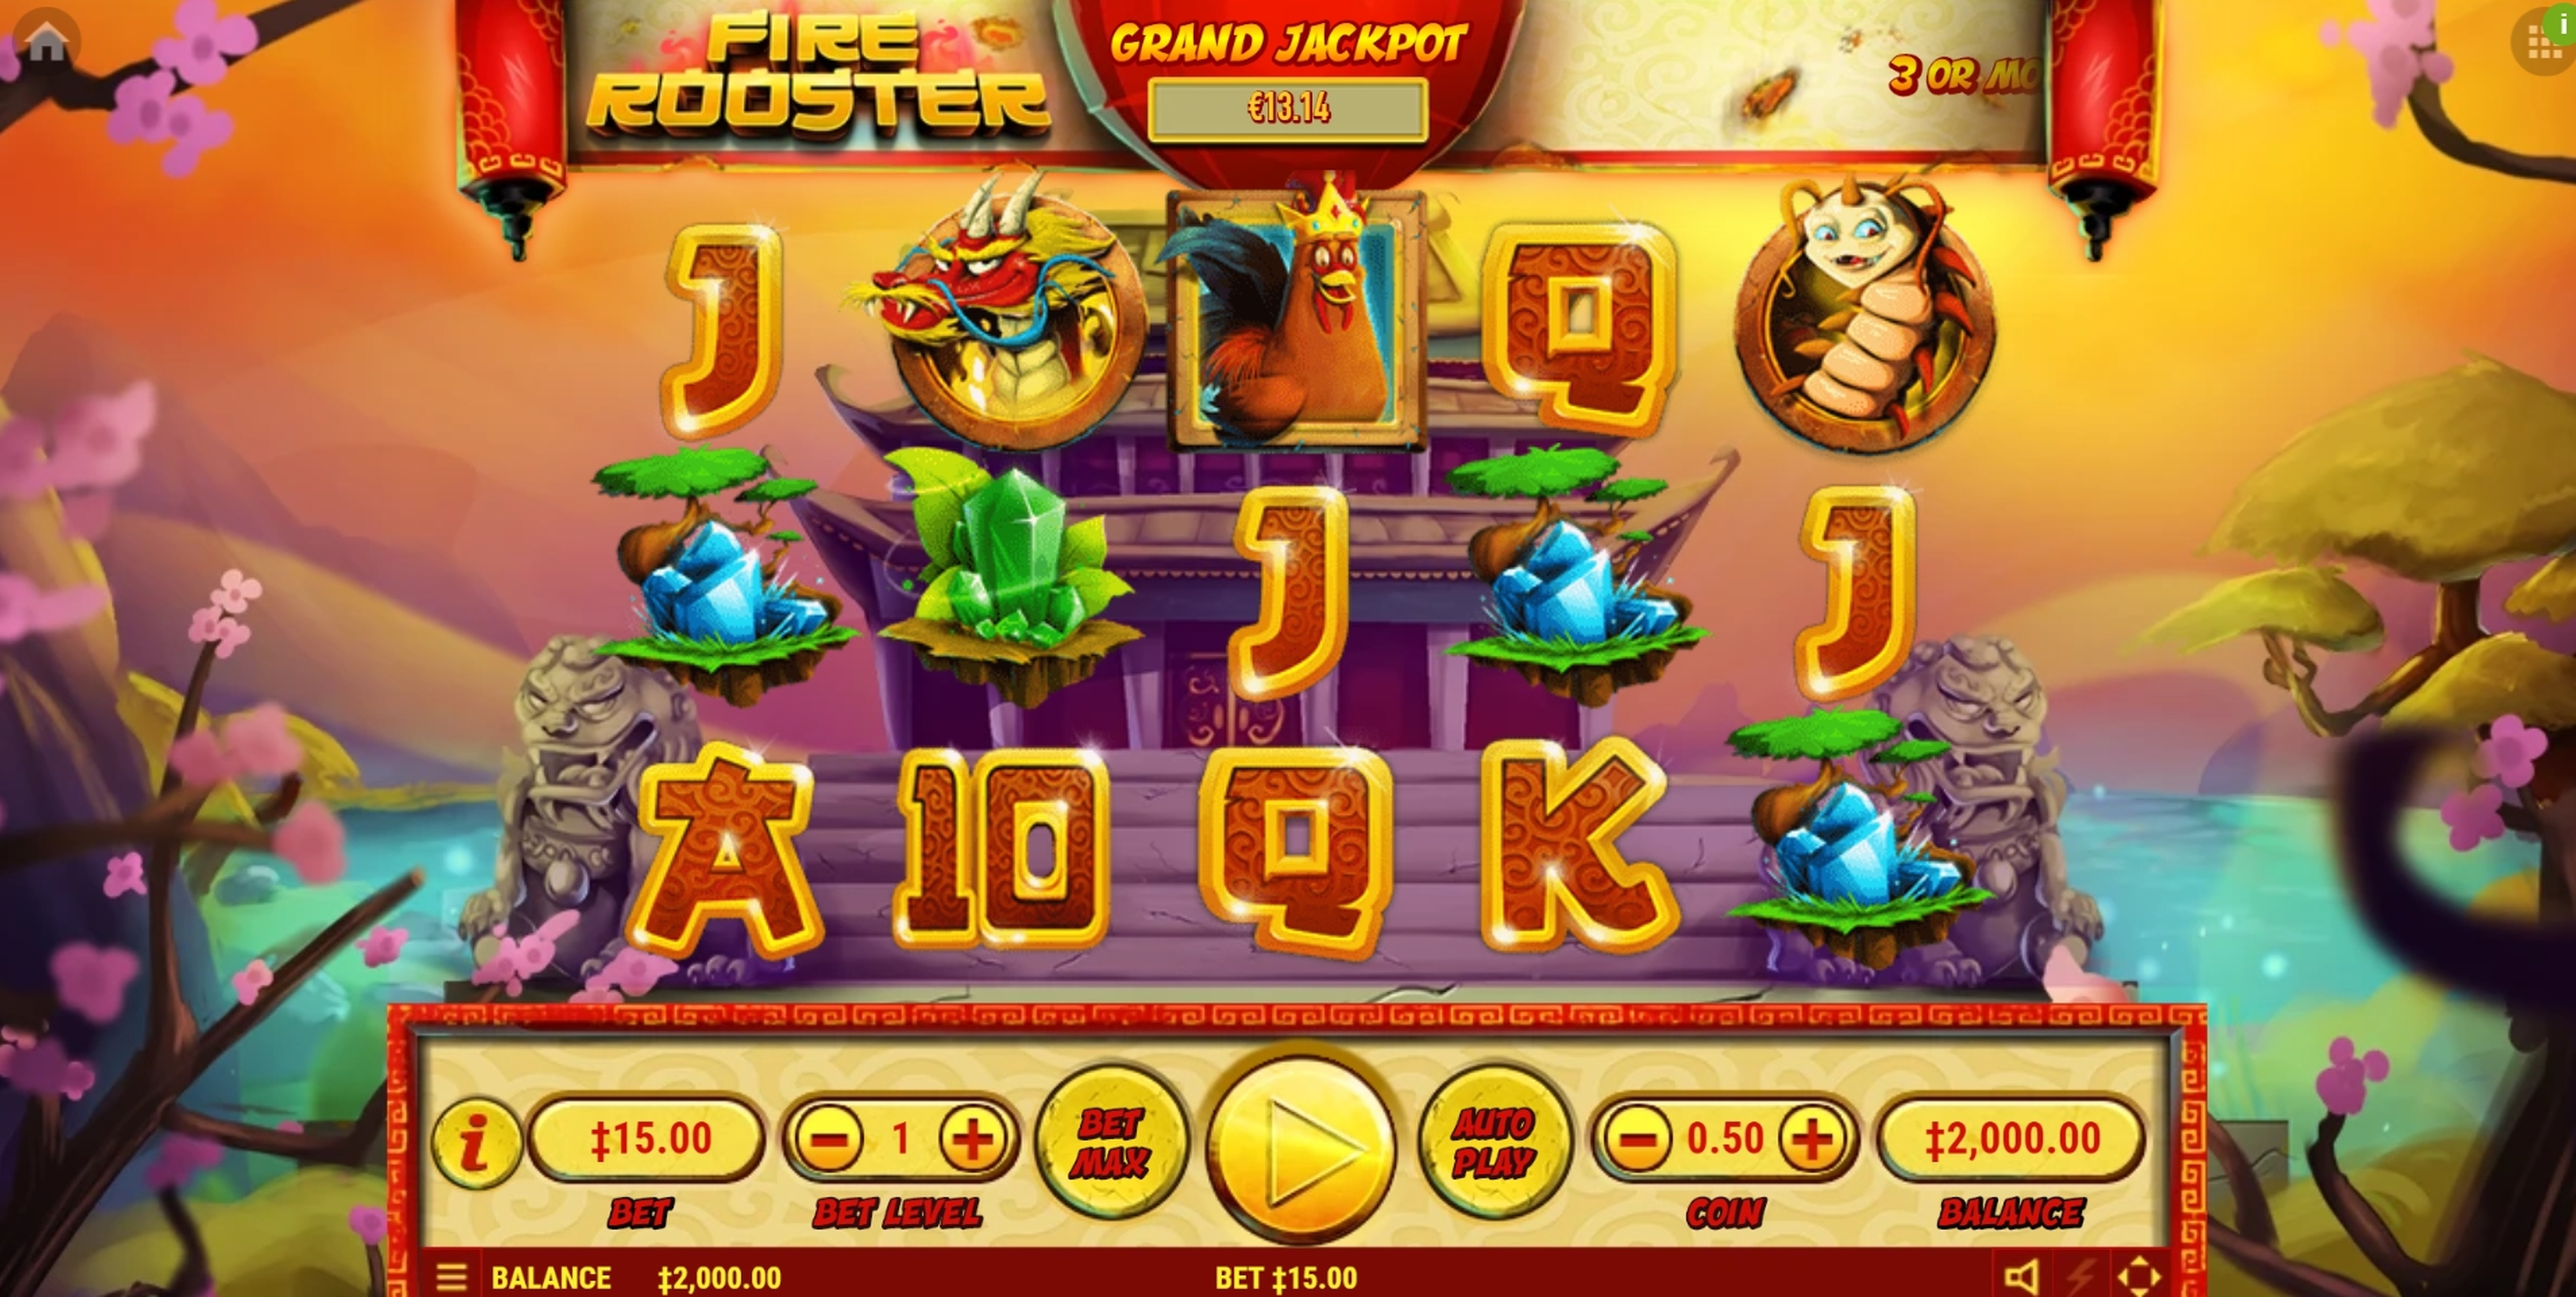 Reels in Fire Rooster Slot Game by Habanero